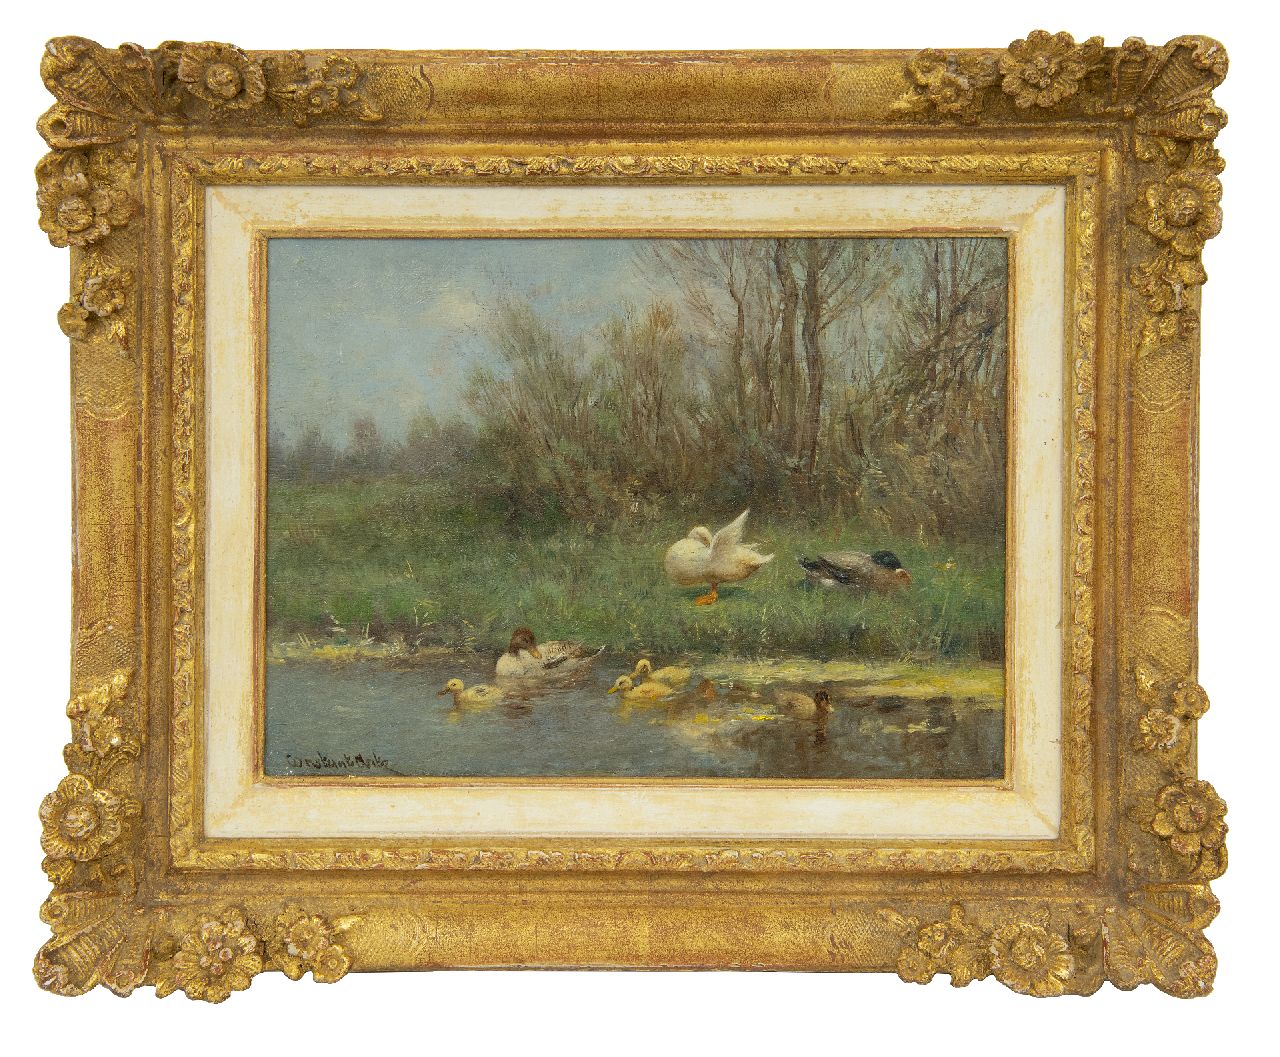 Artz C.D.L.  | 'Constant' David Ludovic Artz | Paintings offered for sale | Ducks and ducklings on a river bank, oil on panel 18.1 x 23.9 cm, signed l.l.